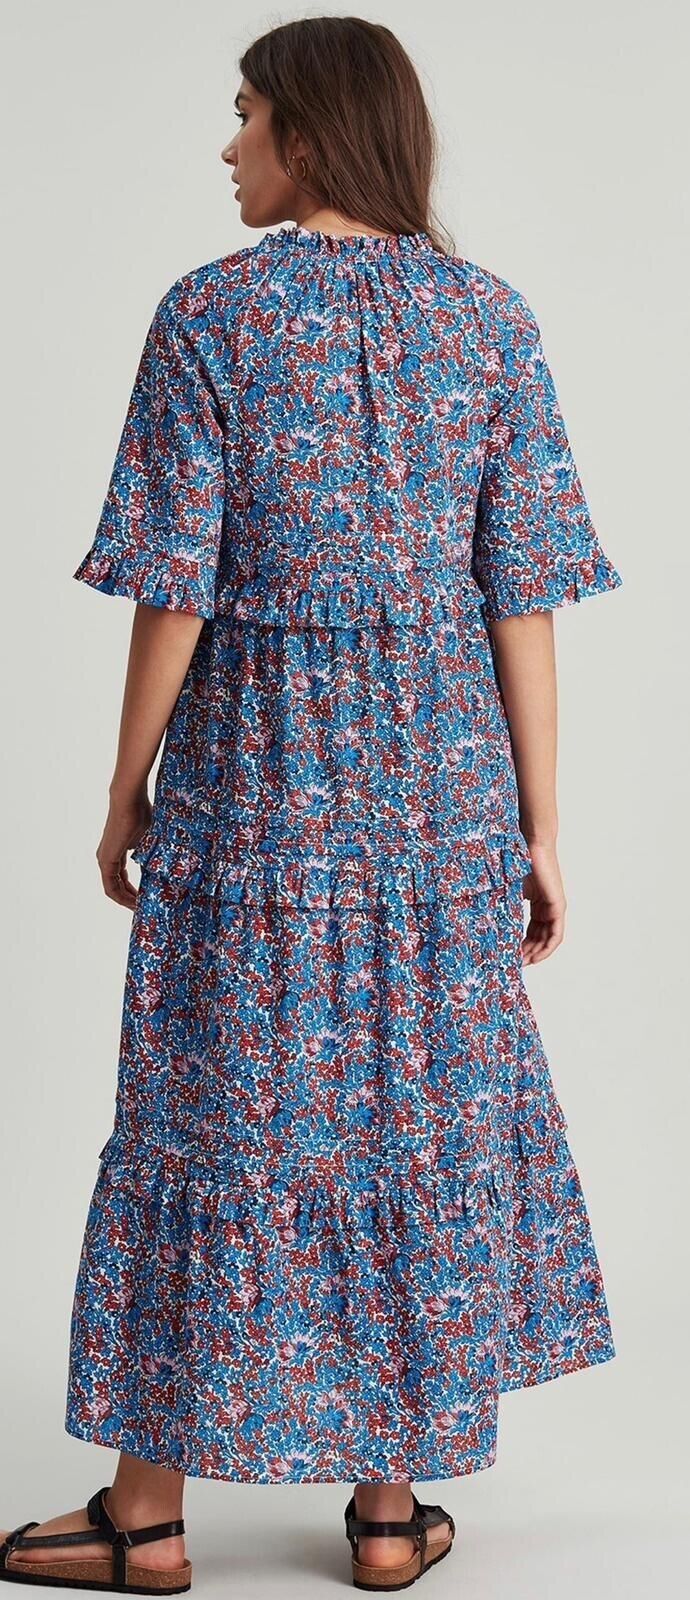 EX Joules Womens Lia Frill Tiered Dress Blue Floral in Sizes 8-18  RRP £99